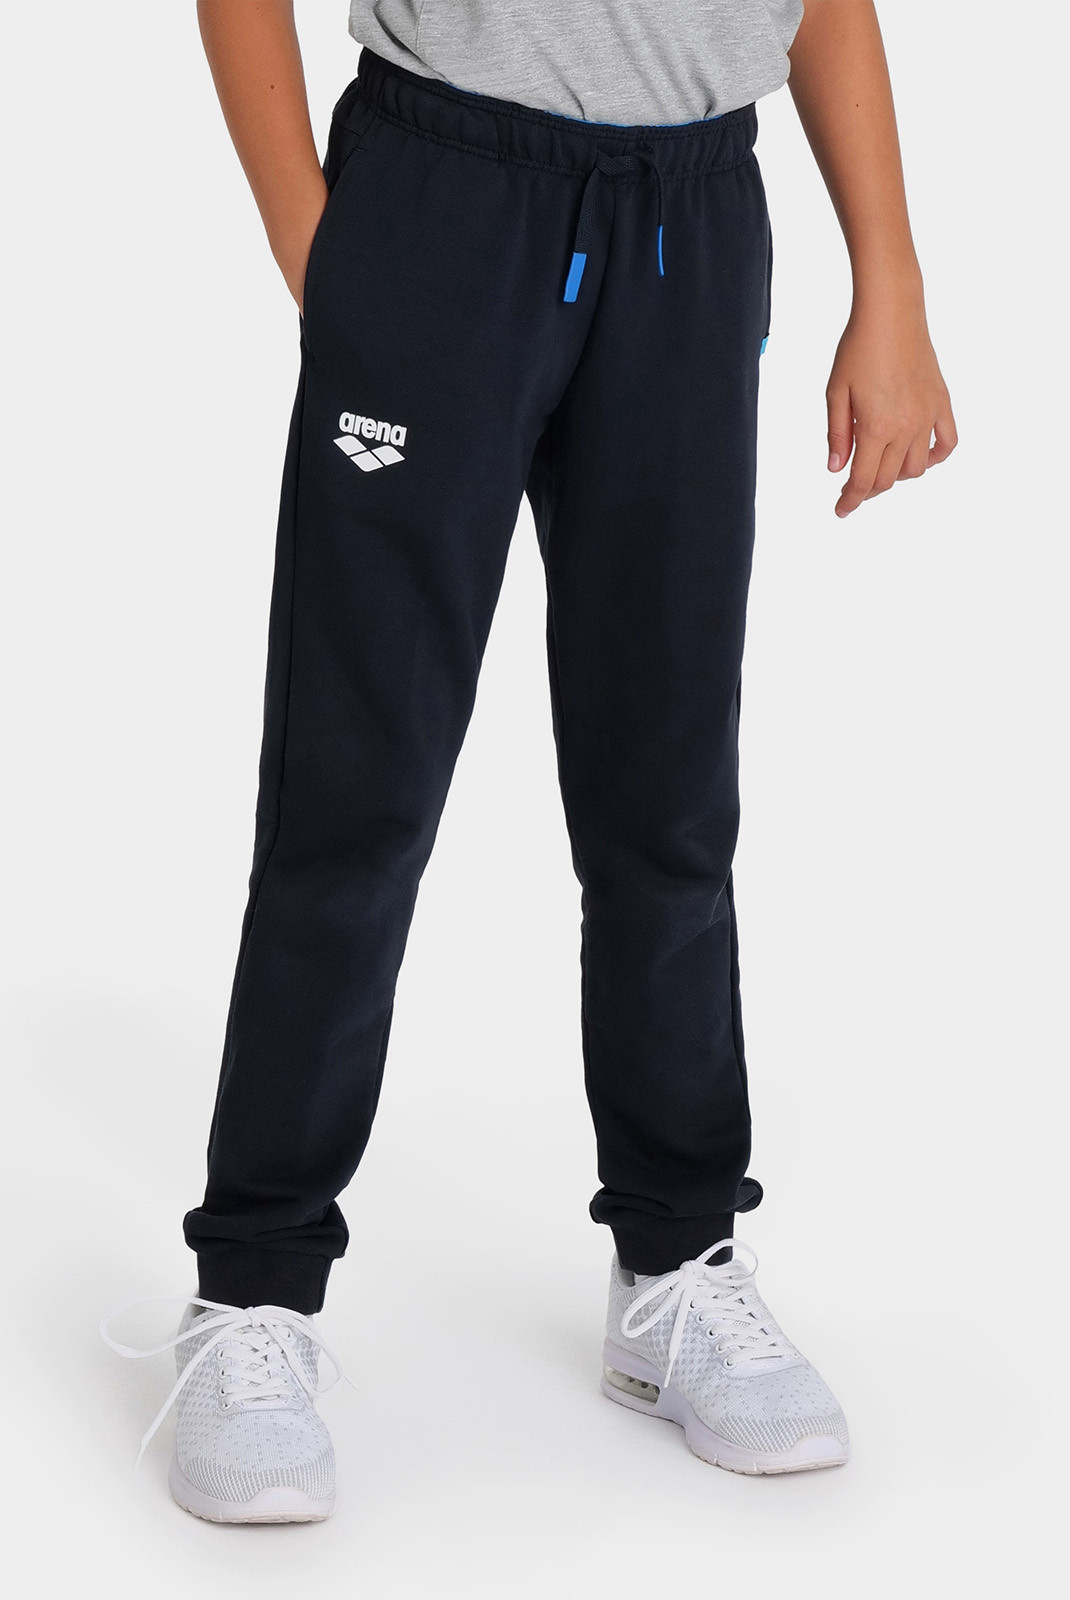 Штани Arena TEAM PANT SOLID 005350-700